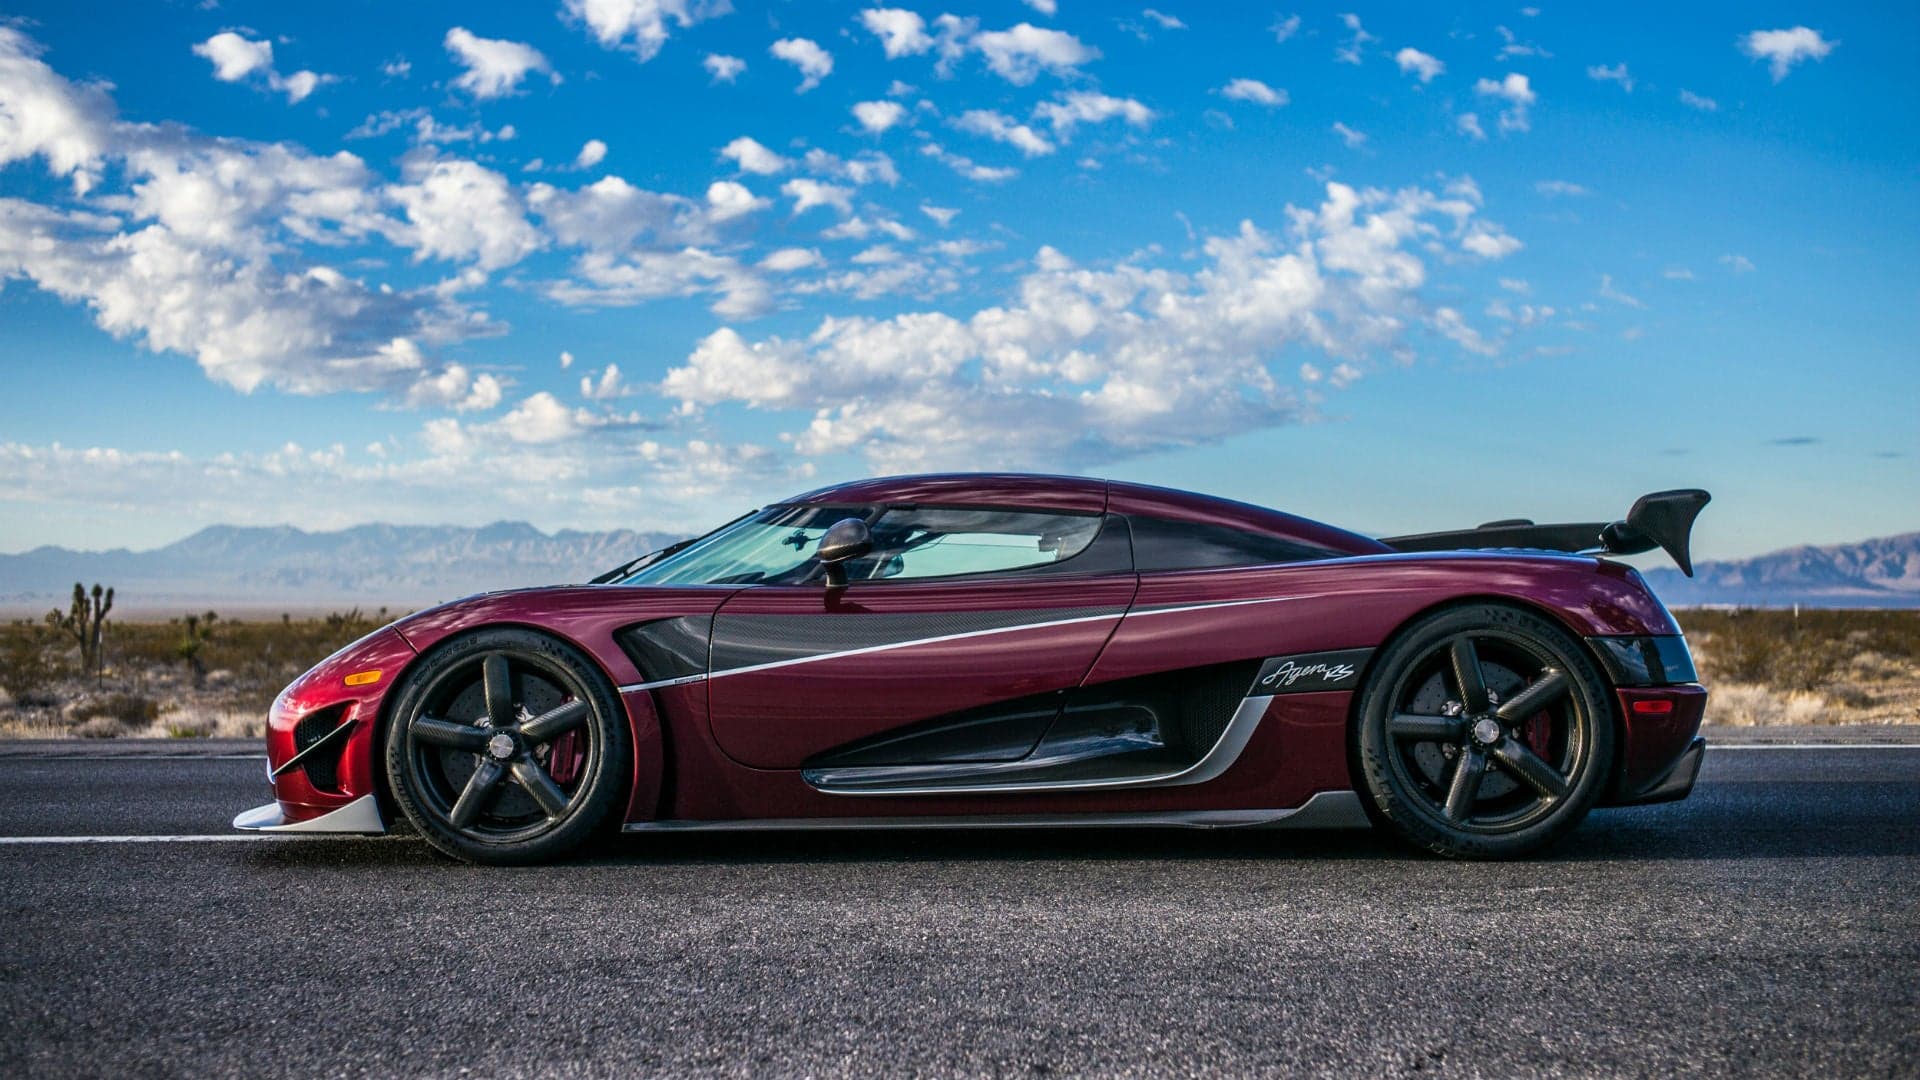 The King is Dead: The Koenigsegg Agera RS Has Officially Ended Production